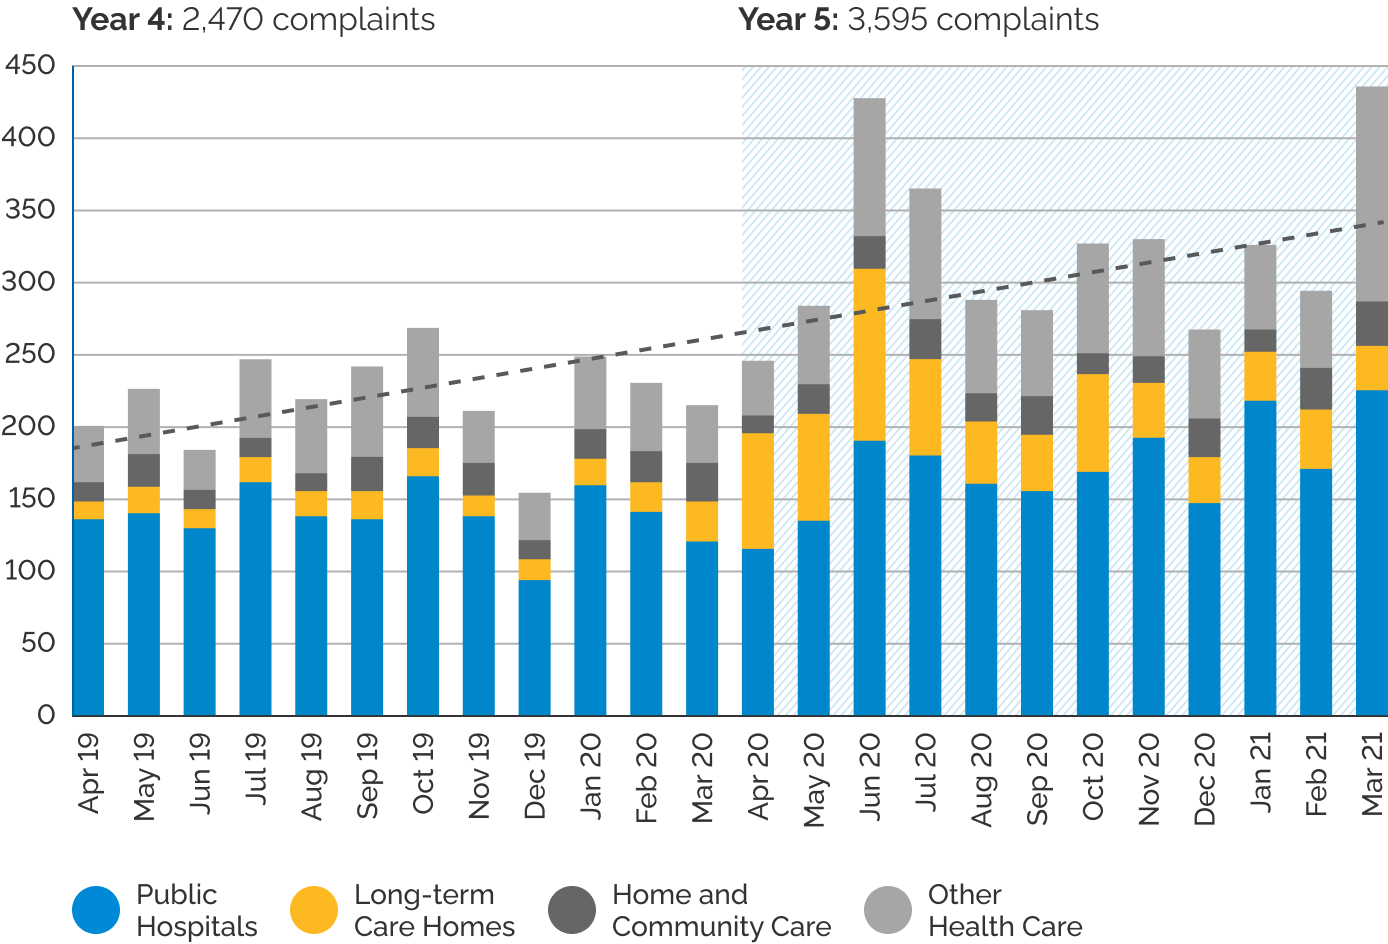 Graph of complaints between April 2019 to March 2021, broken down by health sector organization. Year 4 (April 2019 - March 2020) had 2,470 complaints. Year 5 (April 2020 - March 2021) had 3,595 complaints. The share in Long-term Care Home complaints increases starting March 2020, with peak complaints between April 2020 and July 2020.